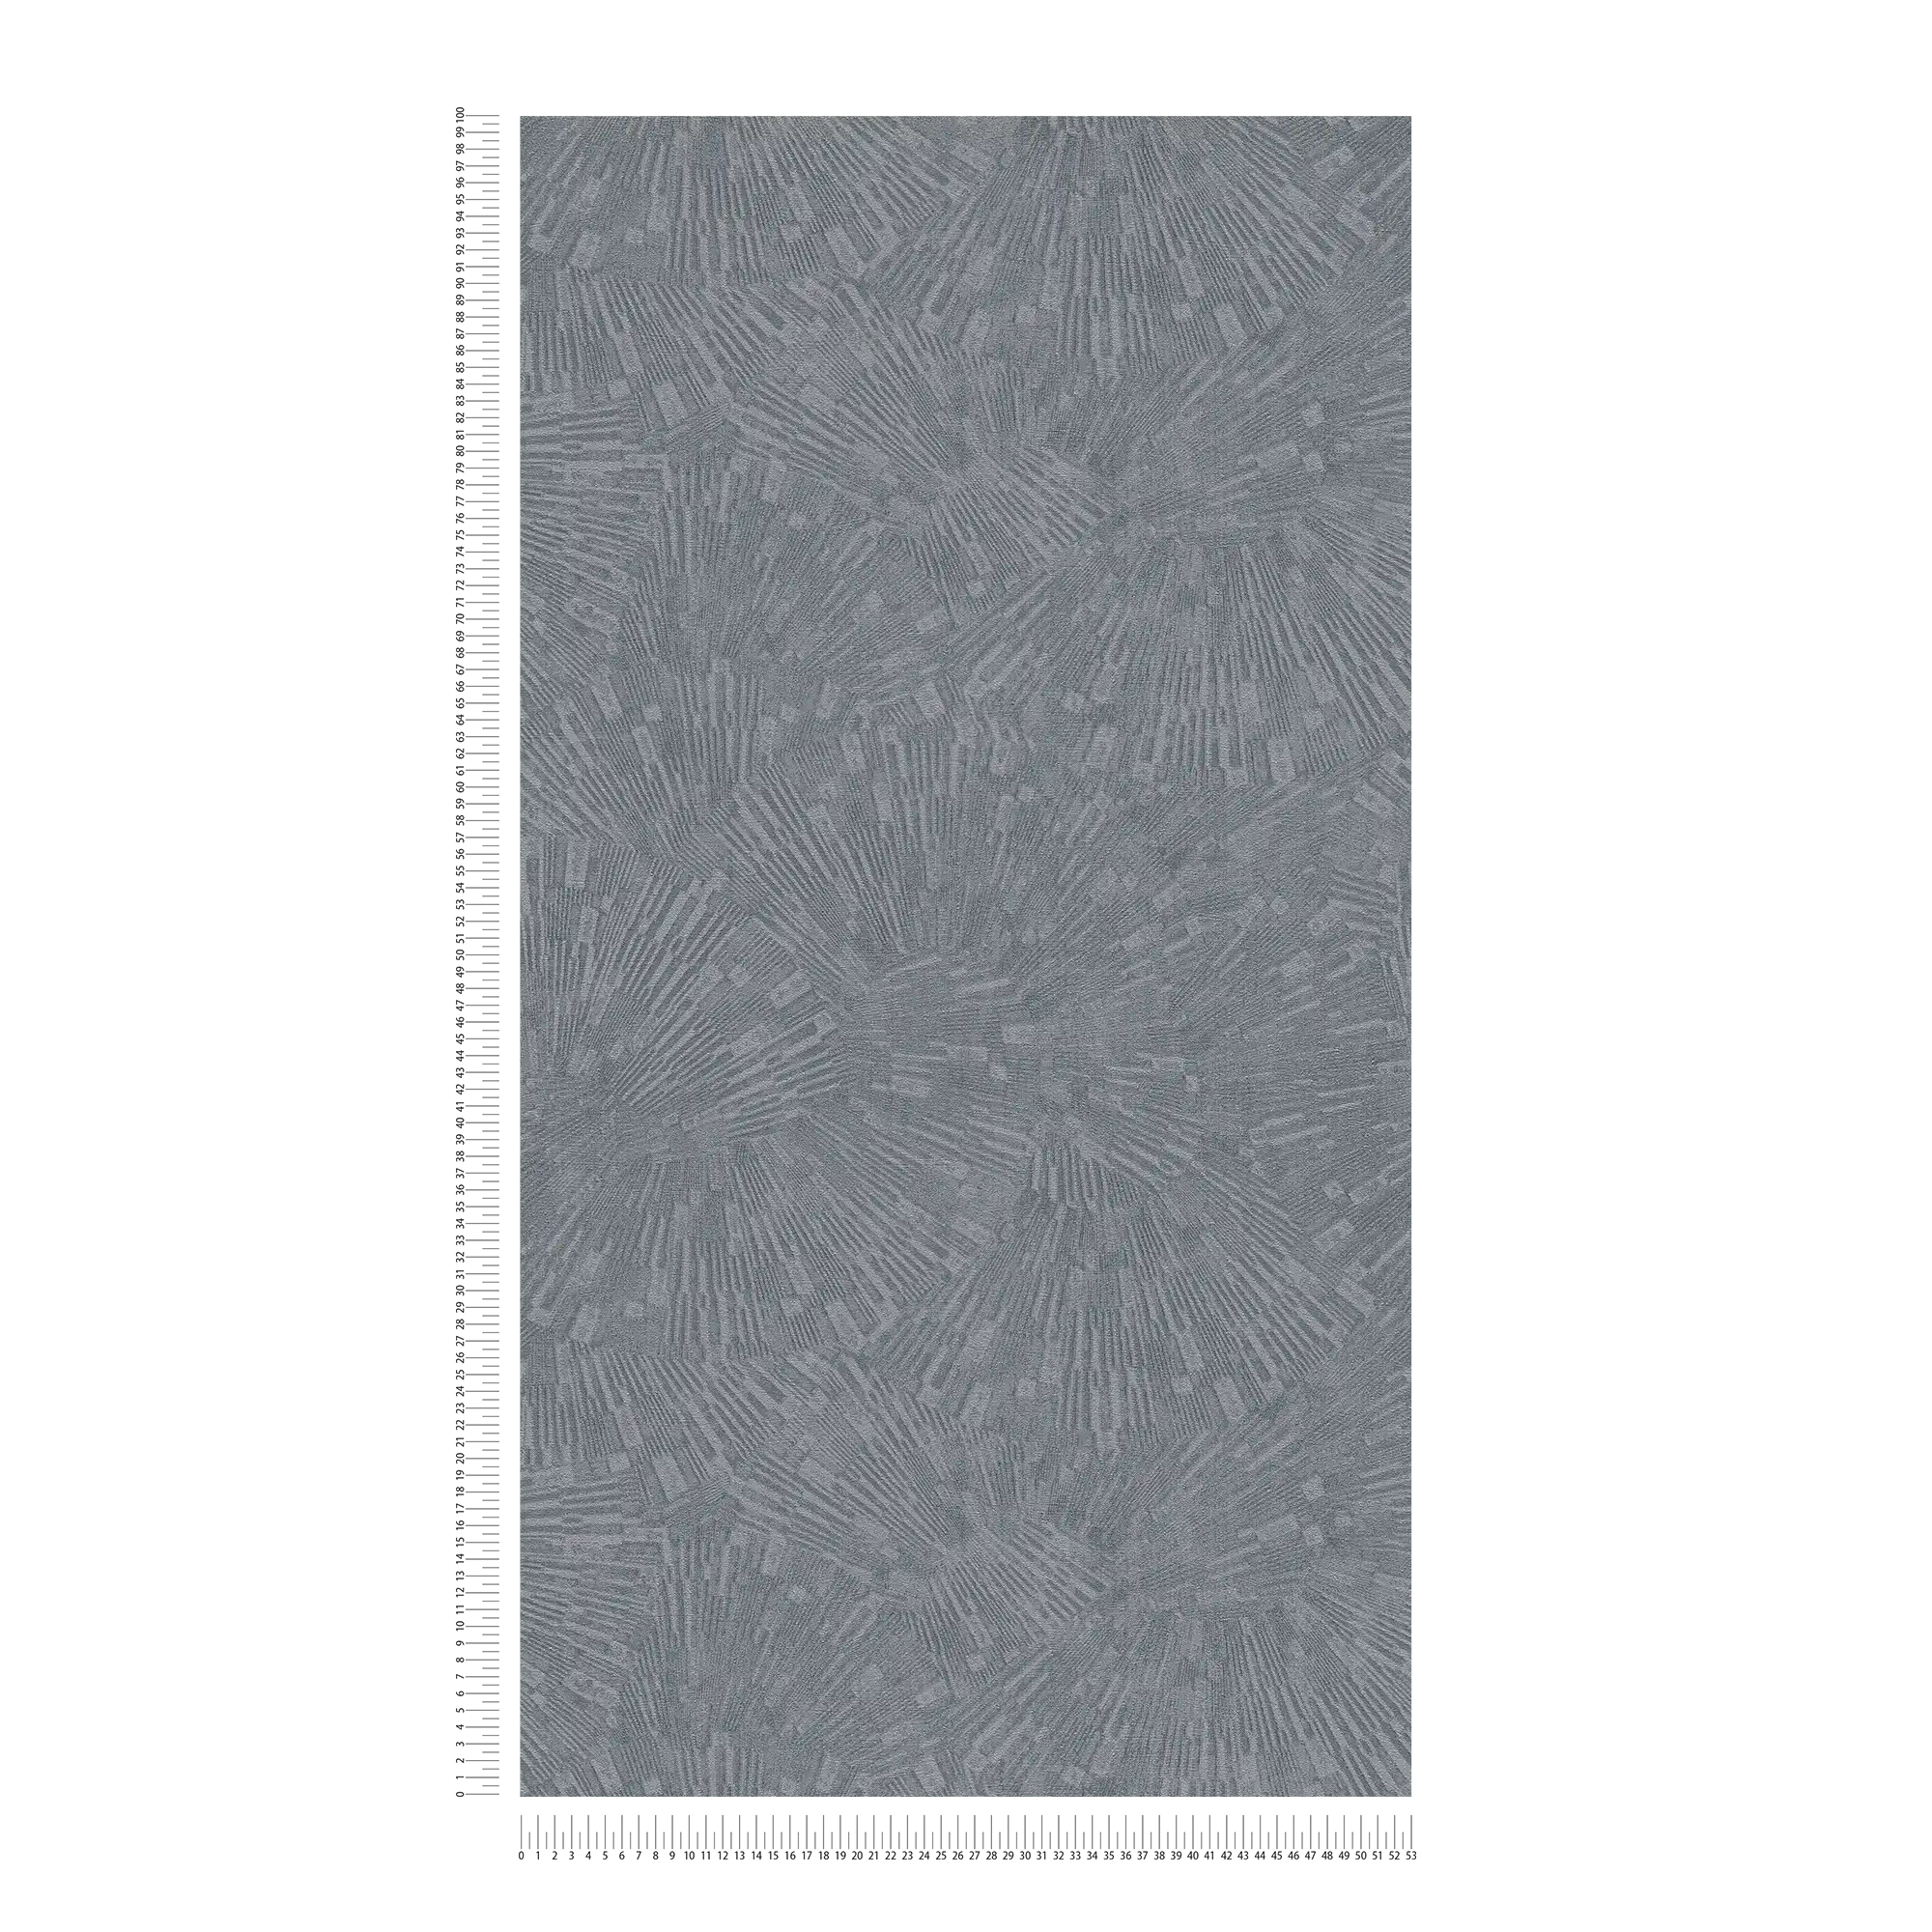             Non-woven wallpaper with graphic pattern in retro style - grey
        